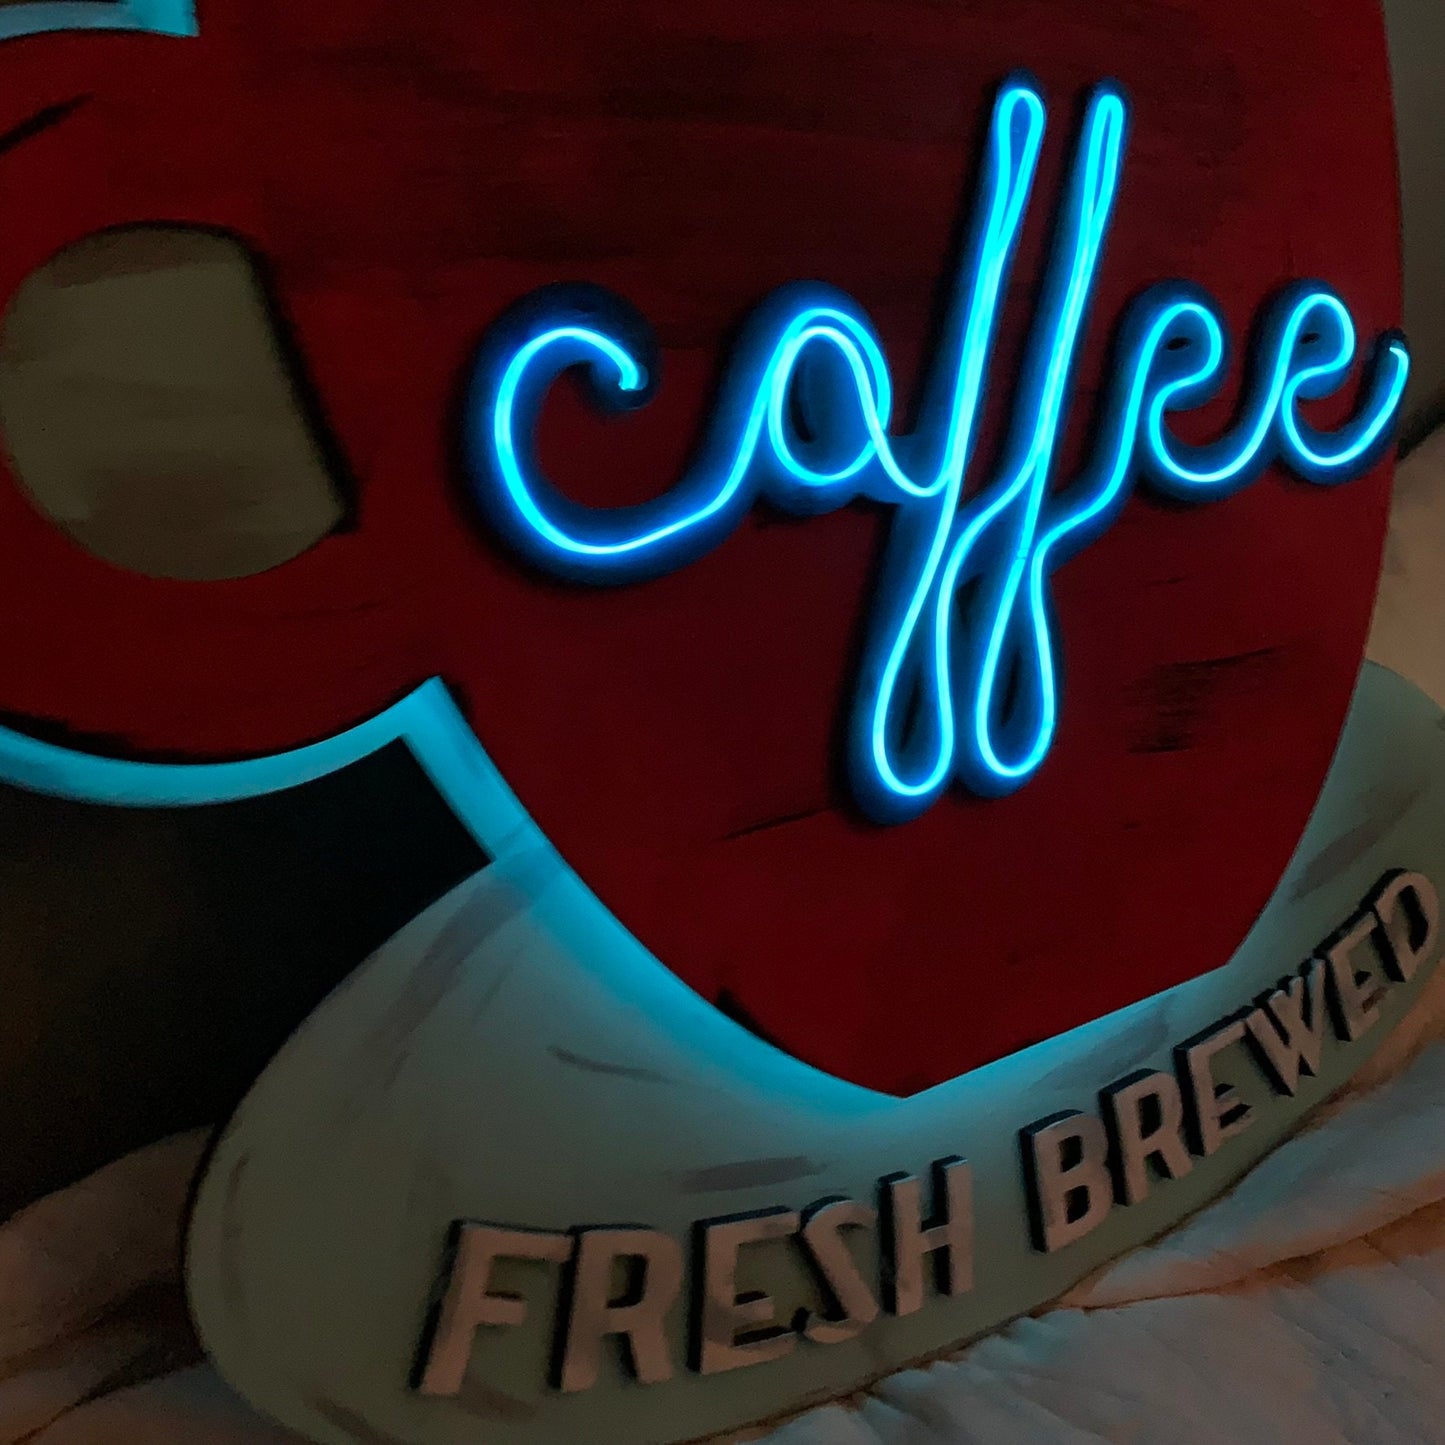 Faux Neon Coffee Cup Sign - Retro Style Wall Hanging - Laser Cut Wood - Fresh Brewed Coffee Neon Sign